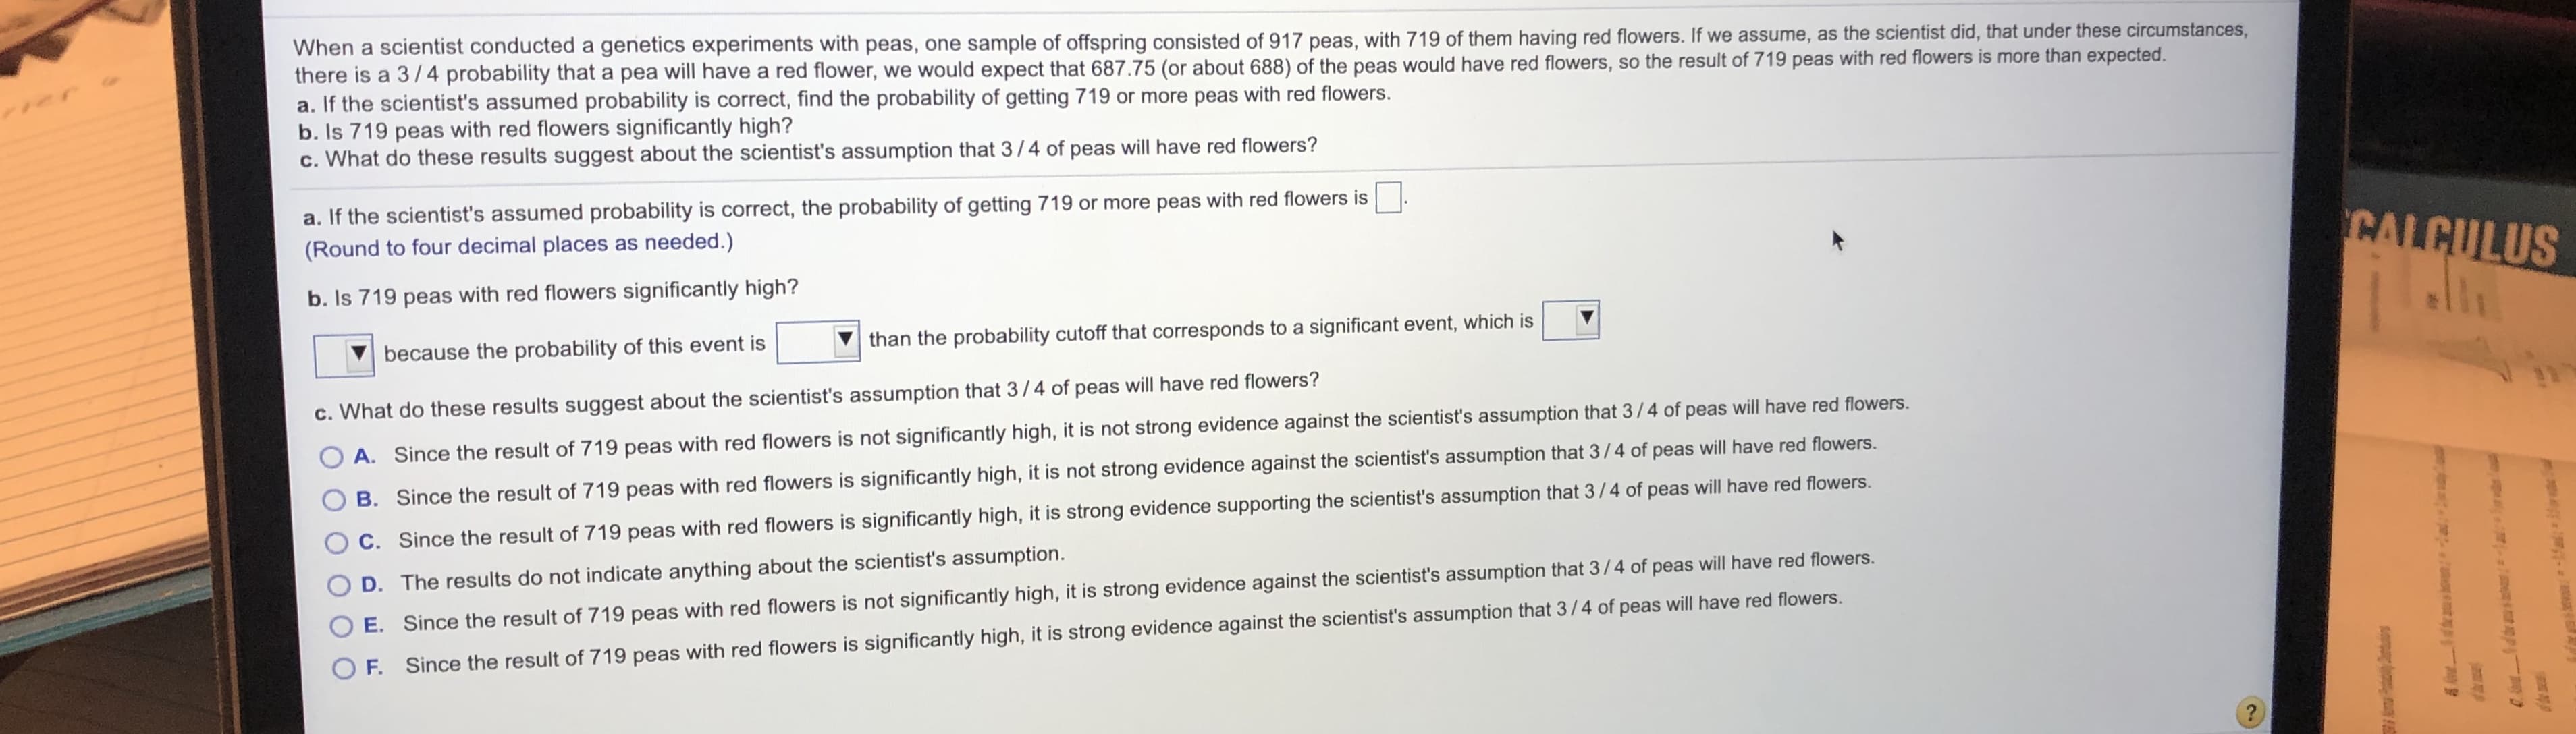 When a scientist conducted a genetics experiments with peas, one sample of offspring consisted of 917 peas, with 719 of them having red flowers. If we assume, as the scientist did, that under these circumstances,
there is a 3/4 probability that a pea will have a red flower, we would expect that 687.75 (or about 688) of the peas would have red flowers, so the result of 719 peas with red flowers is more than expected.
a. If the scientist's assumed probability is correct, find the probability of getting 719 or more peas with red flowers.
b. Is 719 peas with red flowers significantly high?
c. What do these results suggest about the scientist's assumption that 3/ 4 of peas will have red flowers?
a. If the scientist's assumed probability is correct, the probability of getting 719 or more peas with red flowers is
(Round to four decimal places as needed.)
CALCULUS
b. Is 719 peas with red flowers significantly high?
because the probability of this event is
than the probability cutoff that corresponds to a significant event, which is
c. What do these results suggest about the scientist's assumption that 3/4 of peas will have red flowers?
A. Since the result of 719 peas with red flowers is not significantly high, it is not strong evidence against the scientist's assumption that 3/4 of peas will have red flowers.
B. Since the result of 719 peas with red flowers is significantly high, it is not strong evidence against the scientist's assumption that 3/4 of peas will have red flowers.
C. Since the result of 719 peas with red flowers is significantly high, it is strong evidence supporting the scientist's assumption that 3/4 of peas will have red flowers.
O D. The results do not indicate anything about the scientist's assumption.
E. Since the result of 719 peas with red flowers is not significantly high, it is strong evidence against the scientist's assumption that 3/4 of peas will have red flowers.
F. Since the result of 719 peas with red flowers is significantly high, it is strong evidence against the scientist's assumption that 3/4 of peas will have red flowers.
